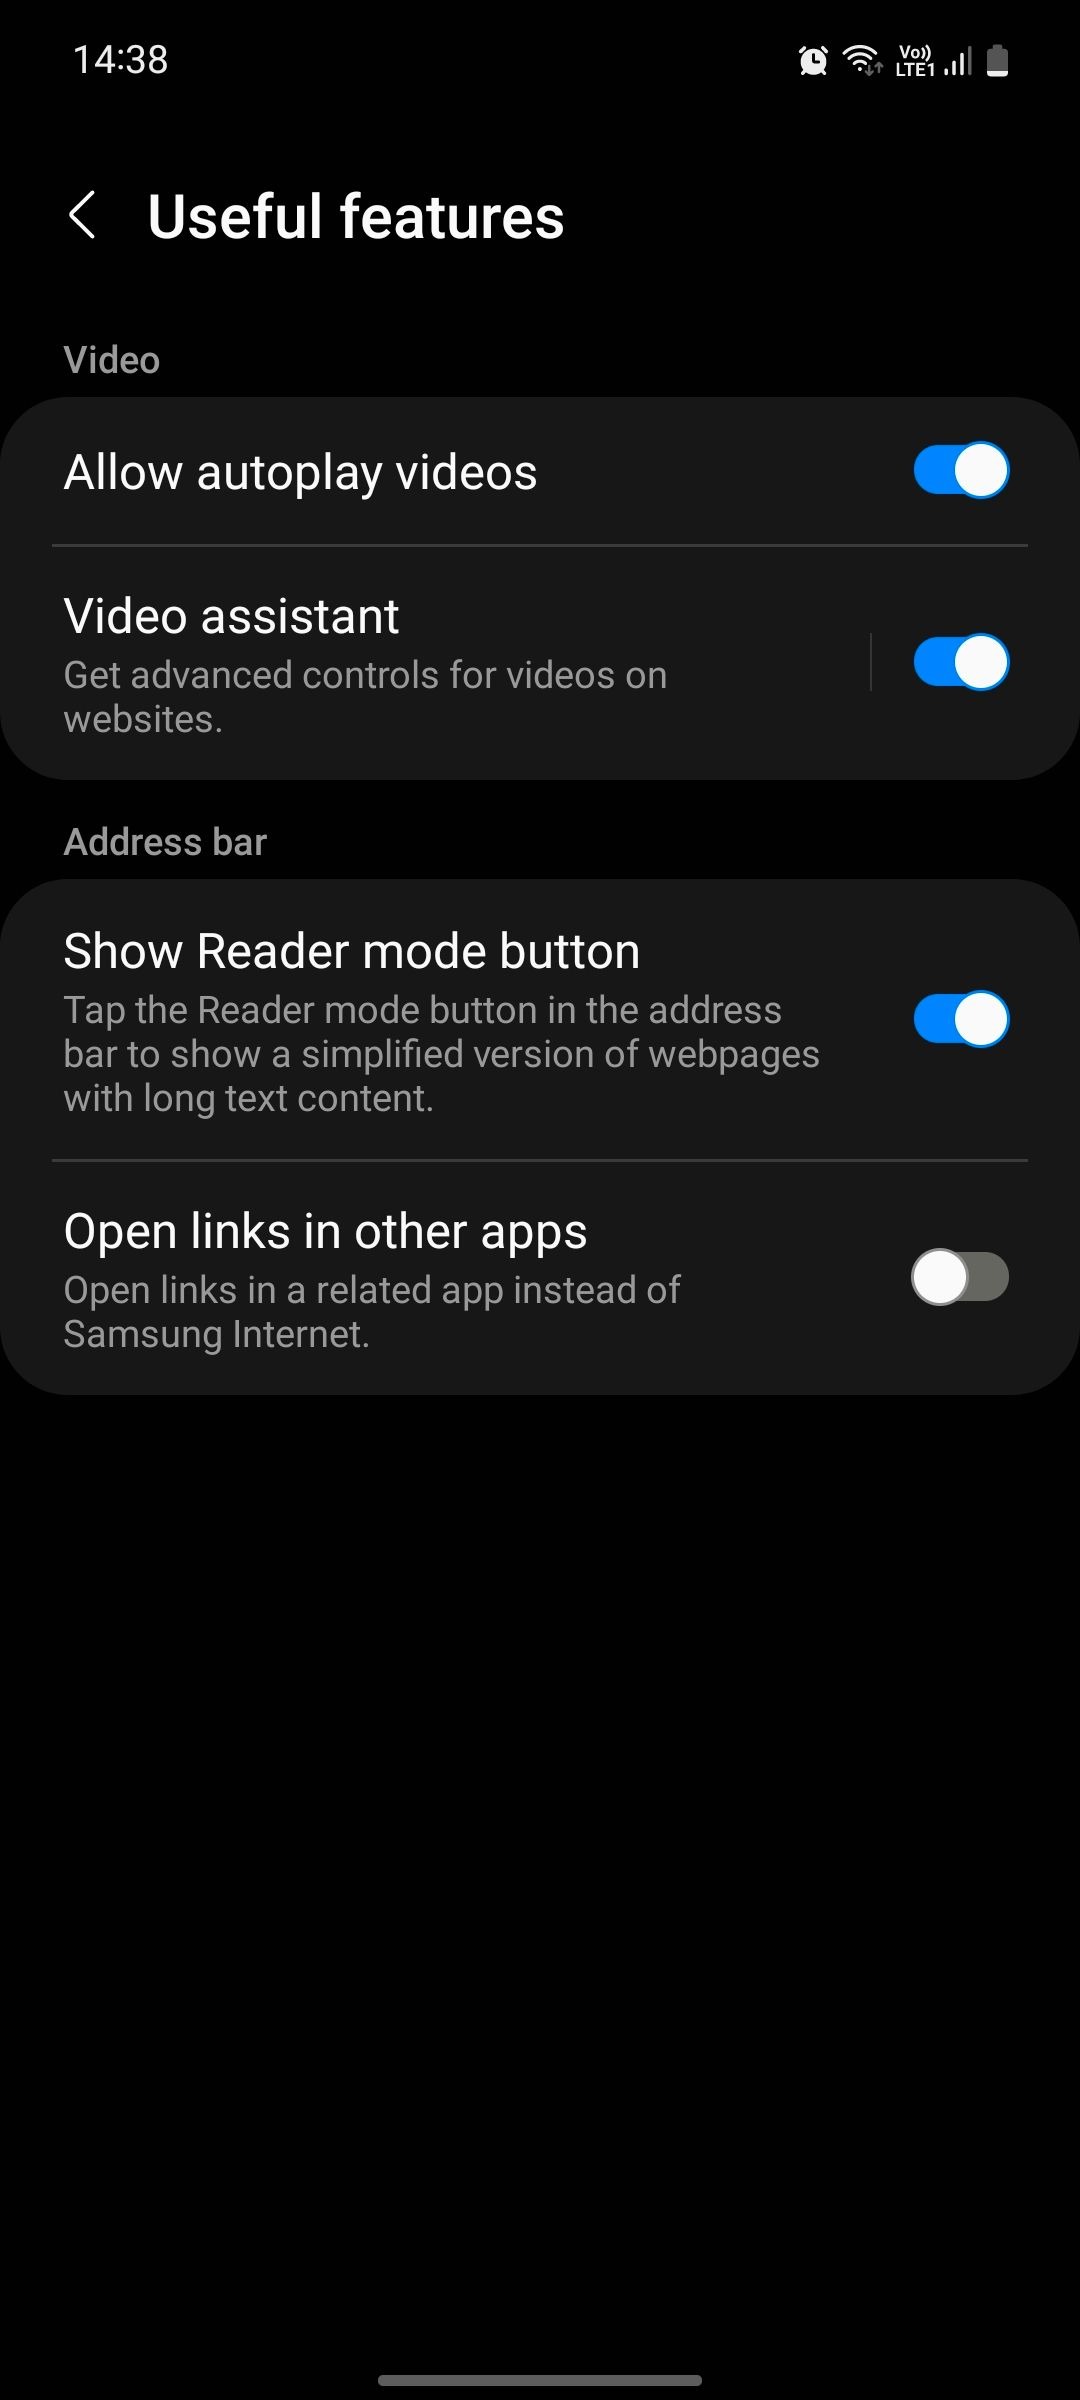 Samsung Internet useful features